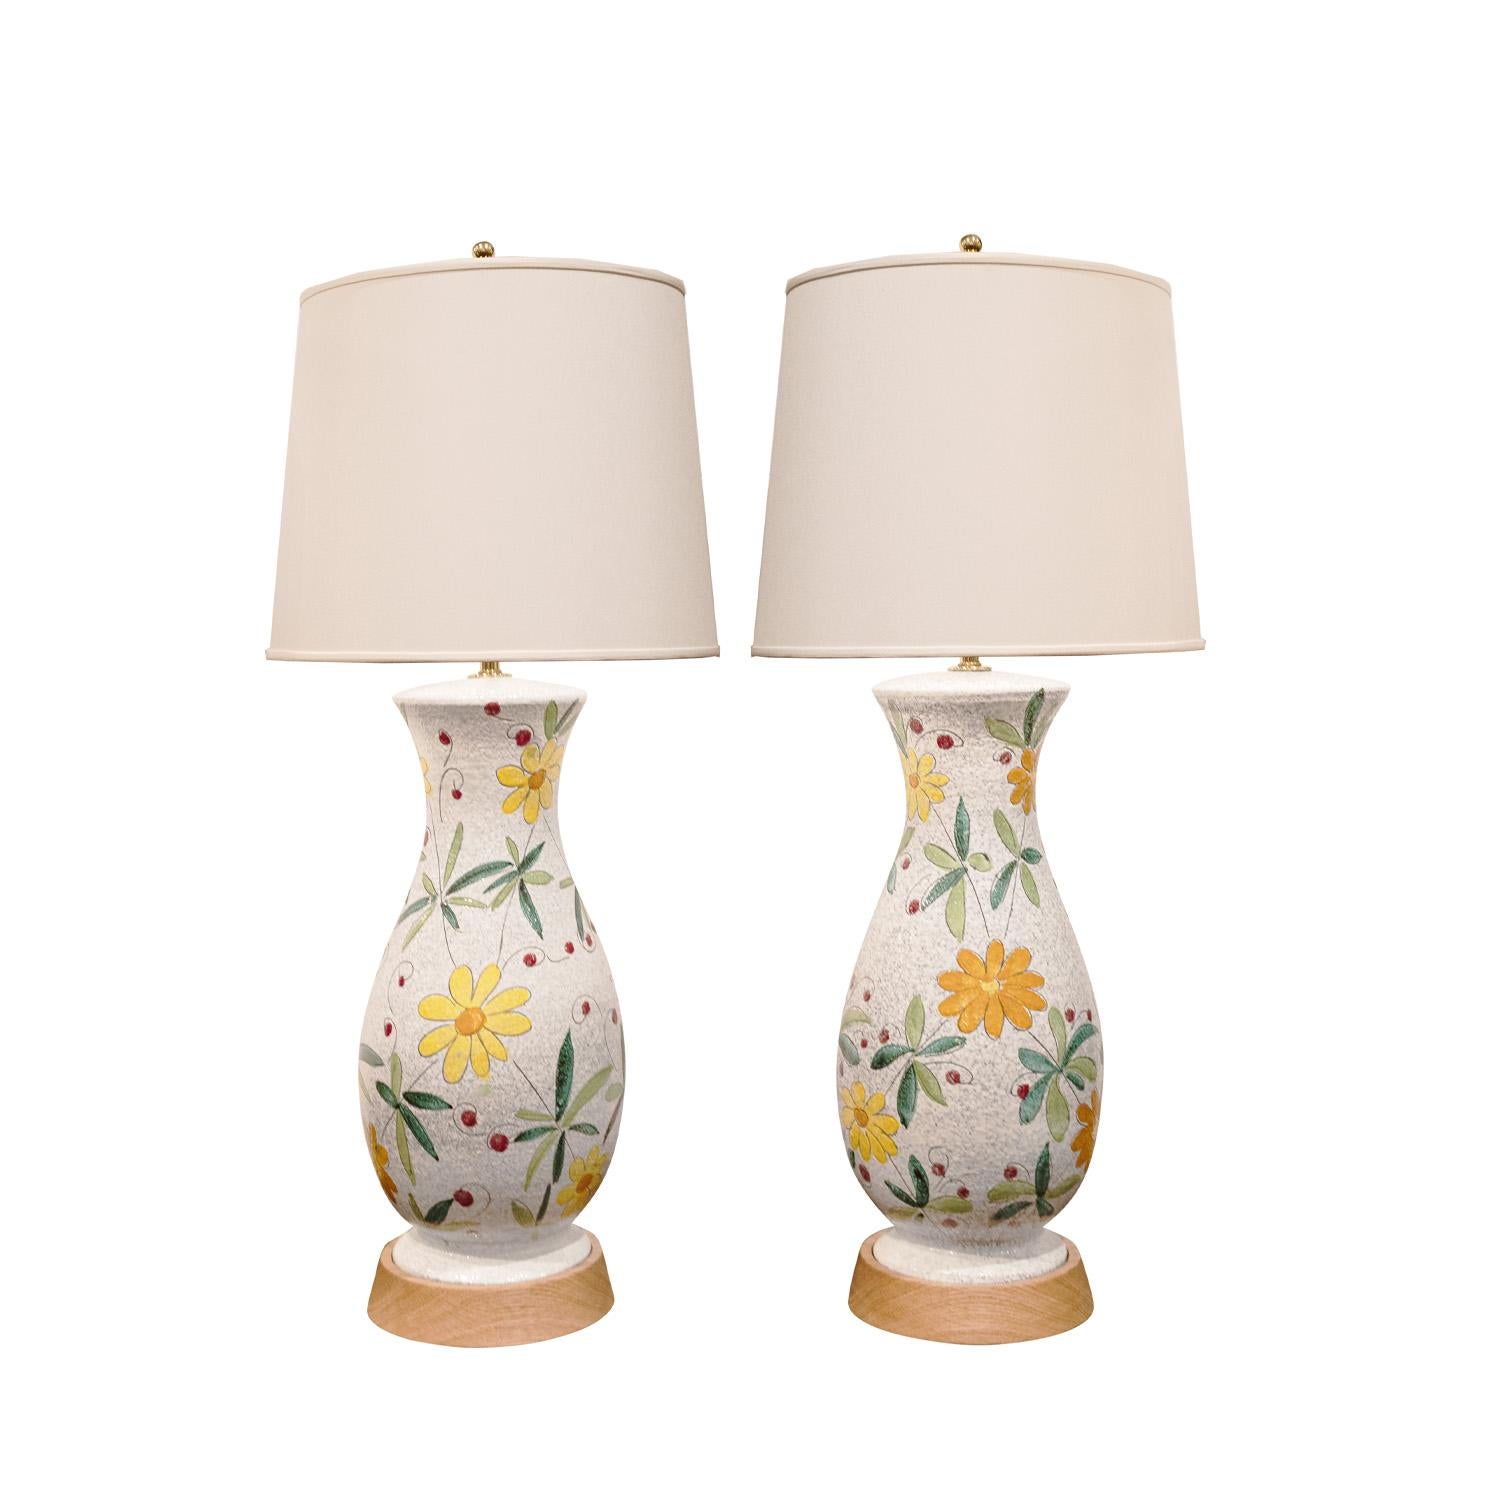 Pair of hand-made ceramic table lamps with flower motif on wood bases with polished brass hardware by Bitossi, Italy 1950's. These are beautifully made with wonderful coloration and execution.

Diameter: 8 inches
Height: 32 inches (adjustable to